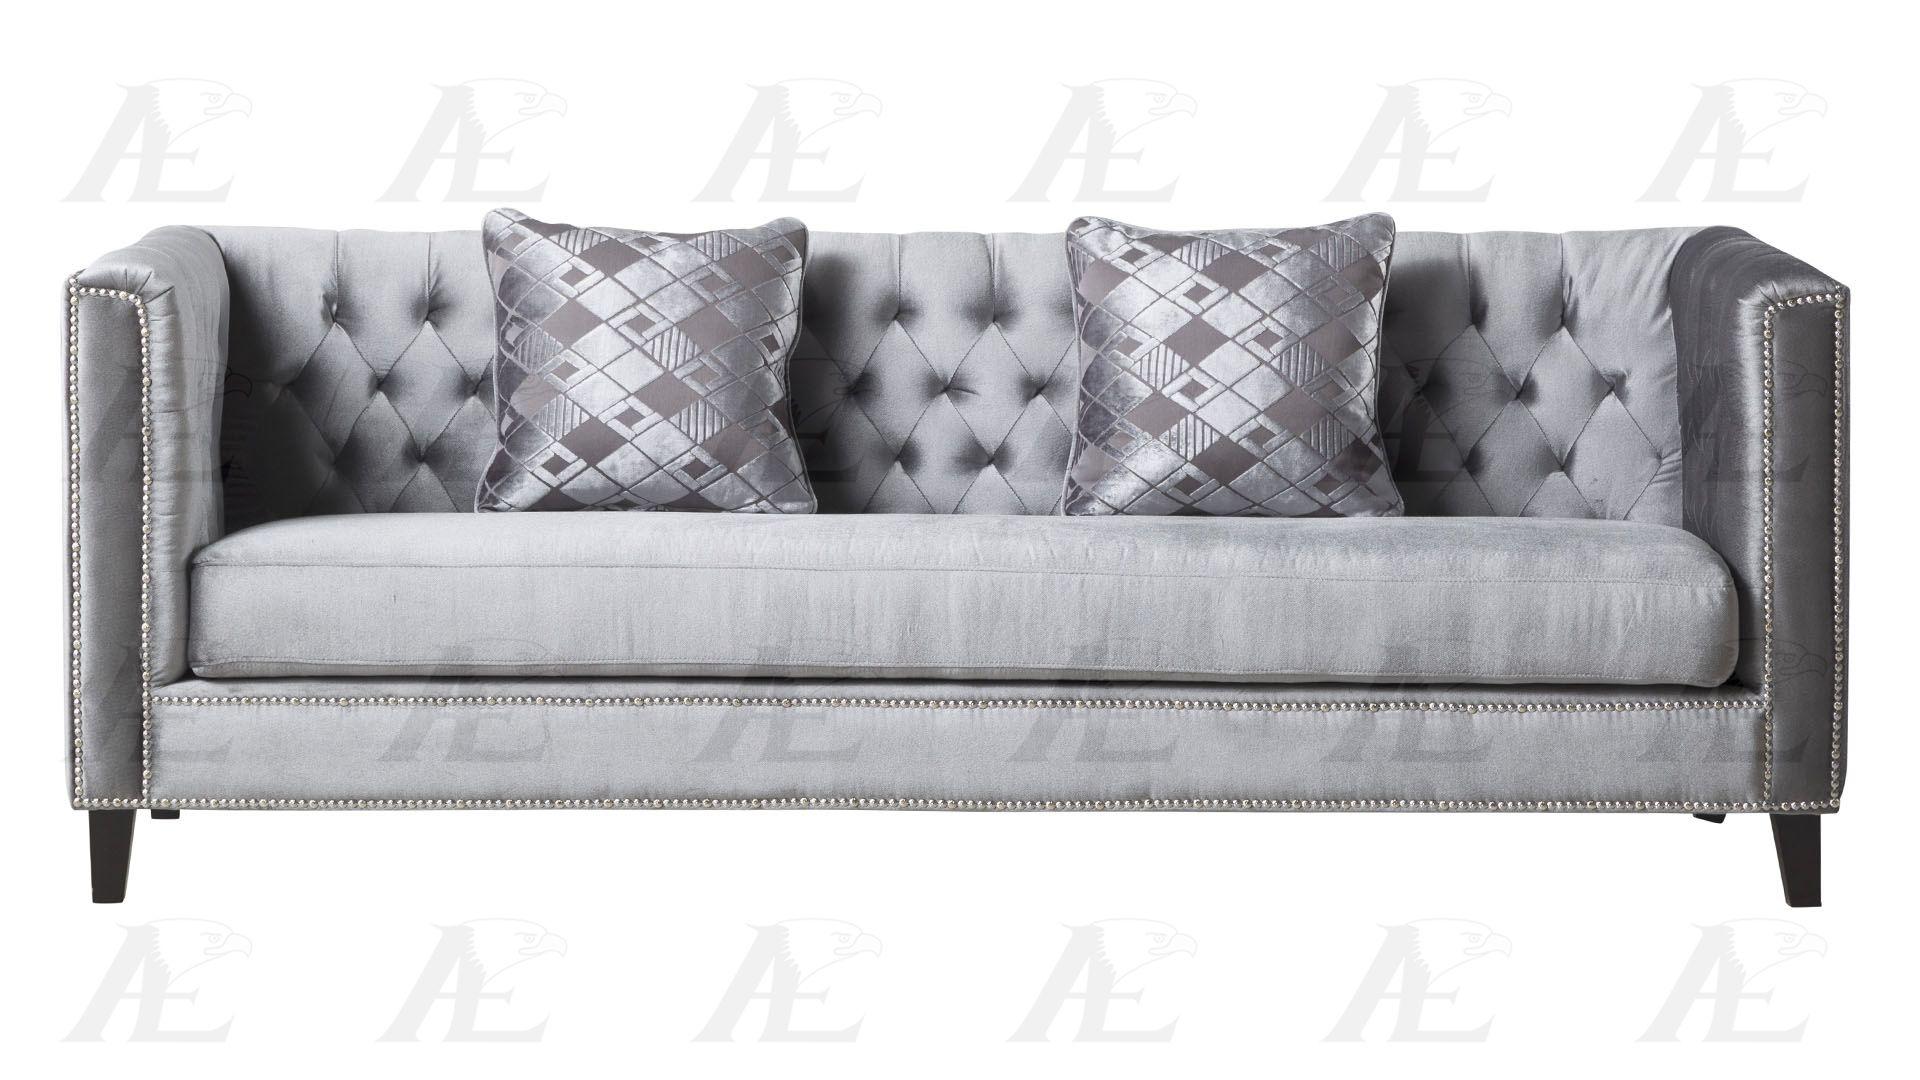 

    
American Eagle Furniture AE2373-GR Gray Fabric Sofa and Loveseat Set 2Pcs Contemporary
